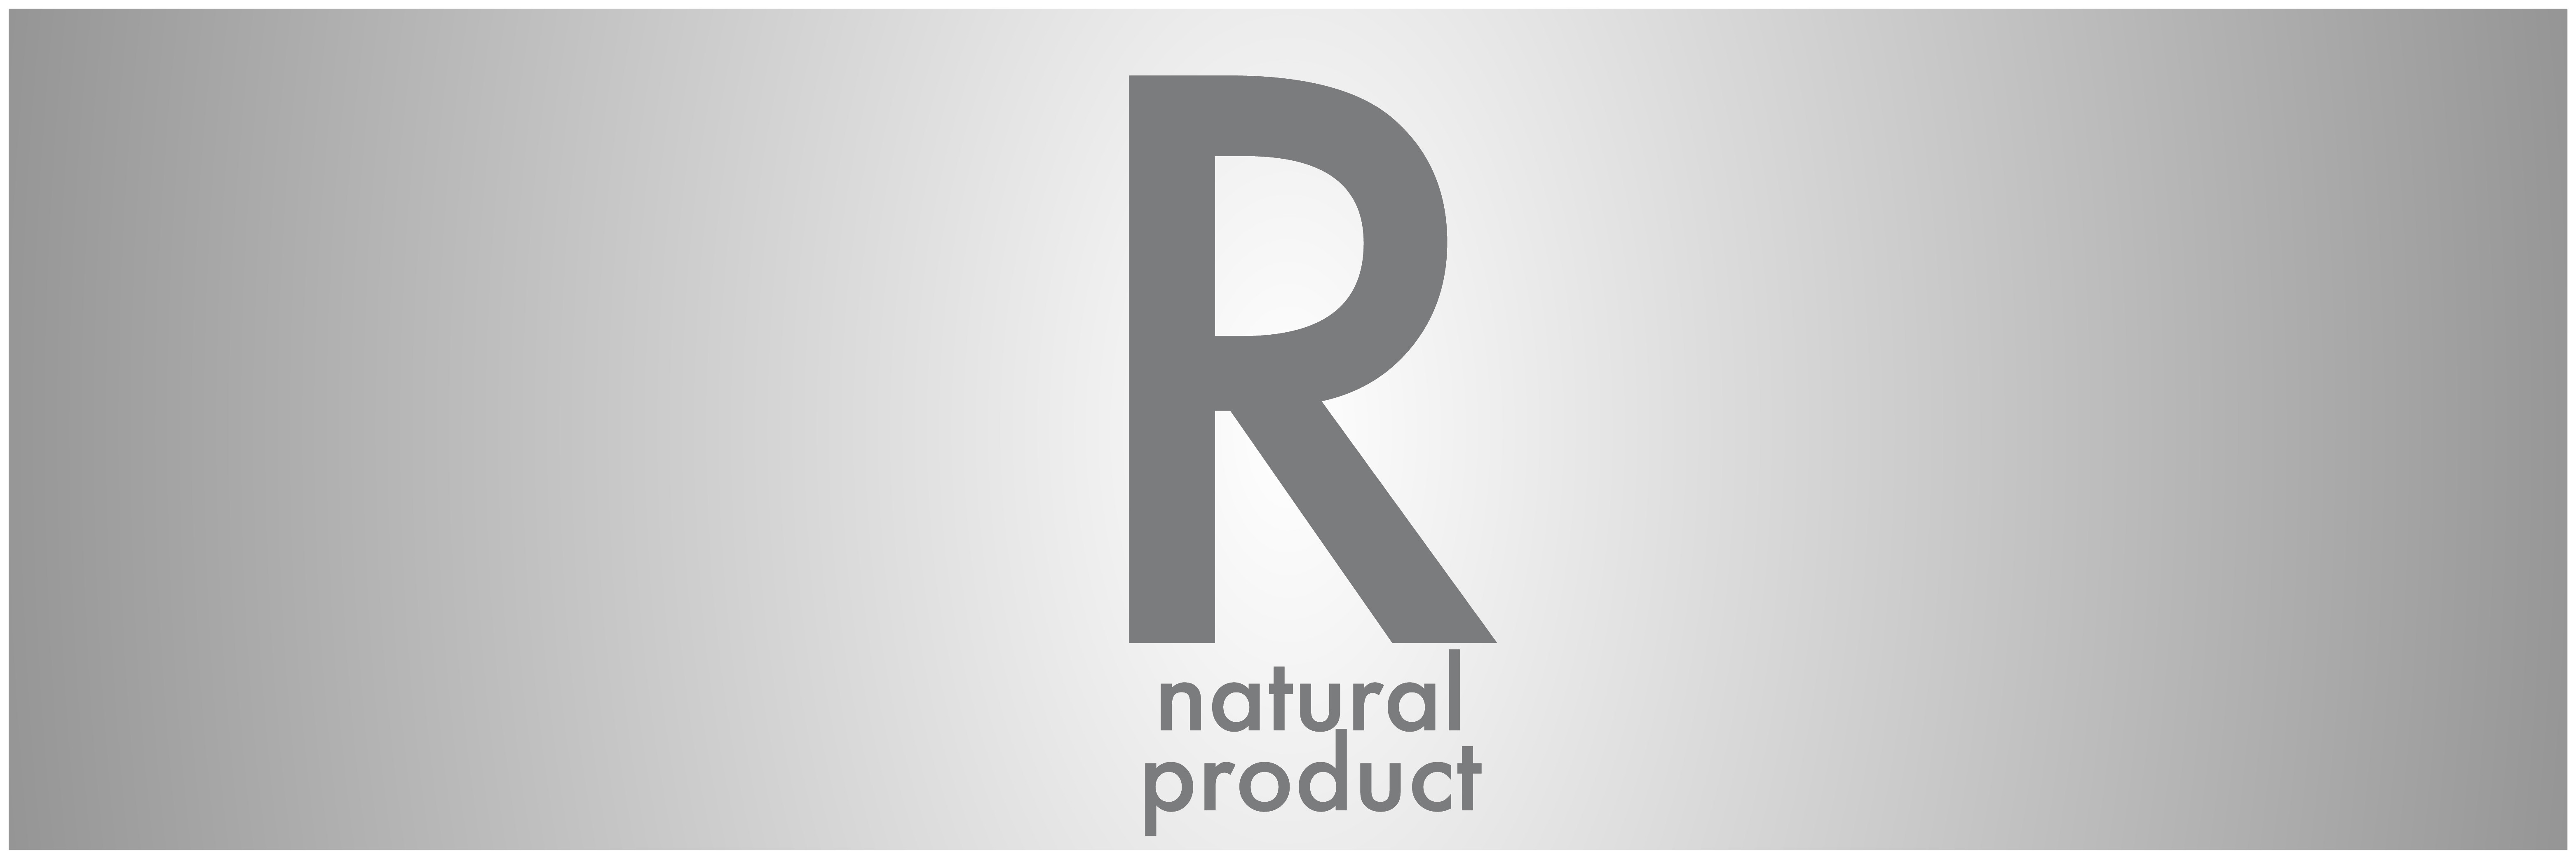 R Natural Product（アール ナチュラル プロダクト）